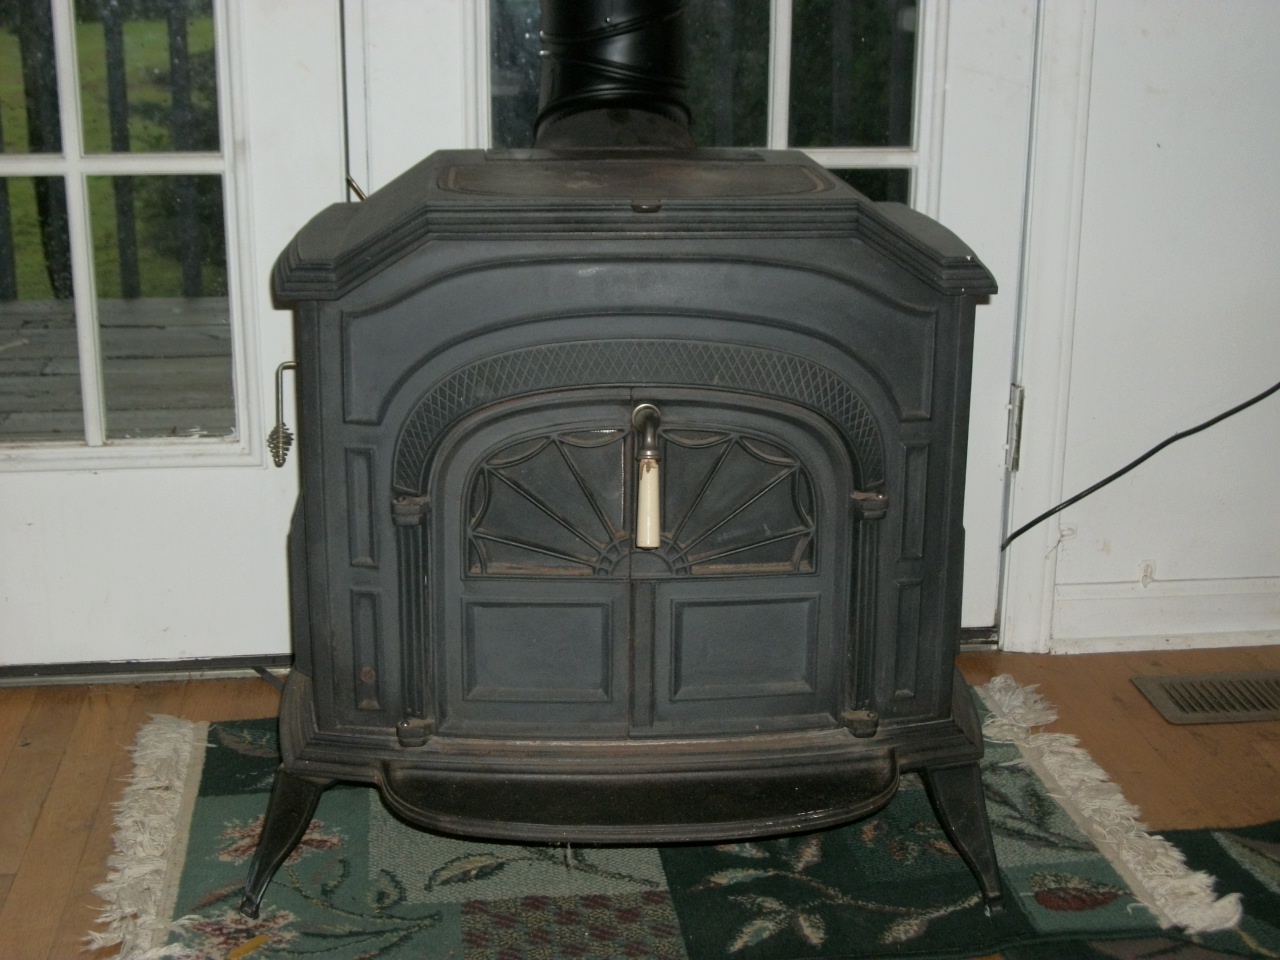 Craigslist Fireplace Awesome Stoves for Sale Used Wood Stoves for Sale Craigslist